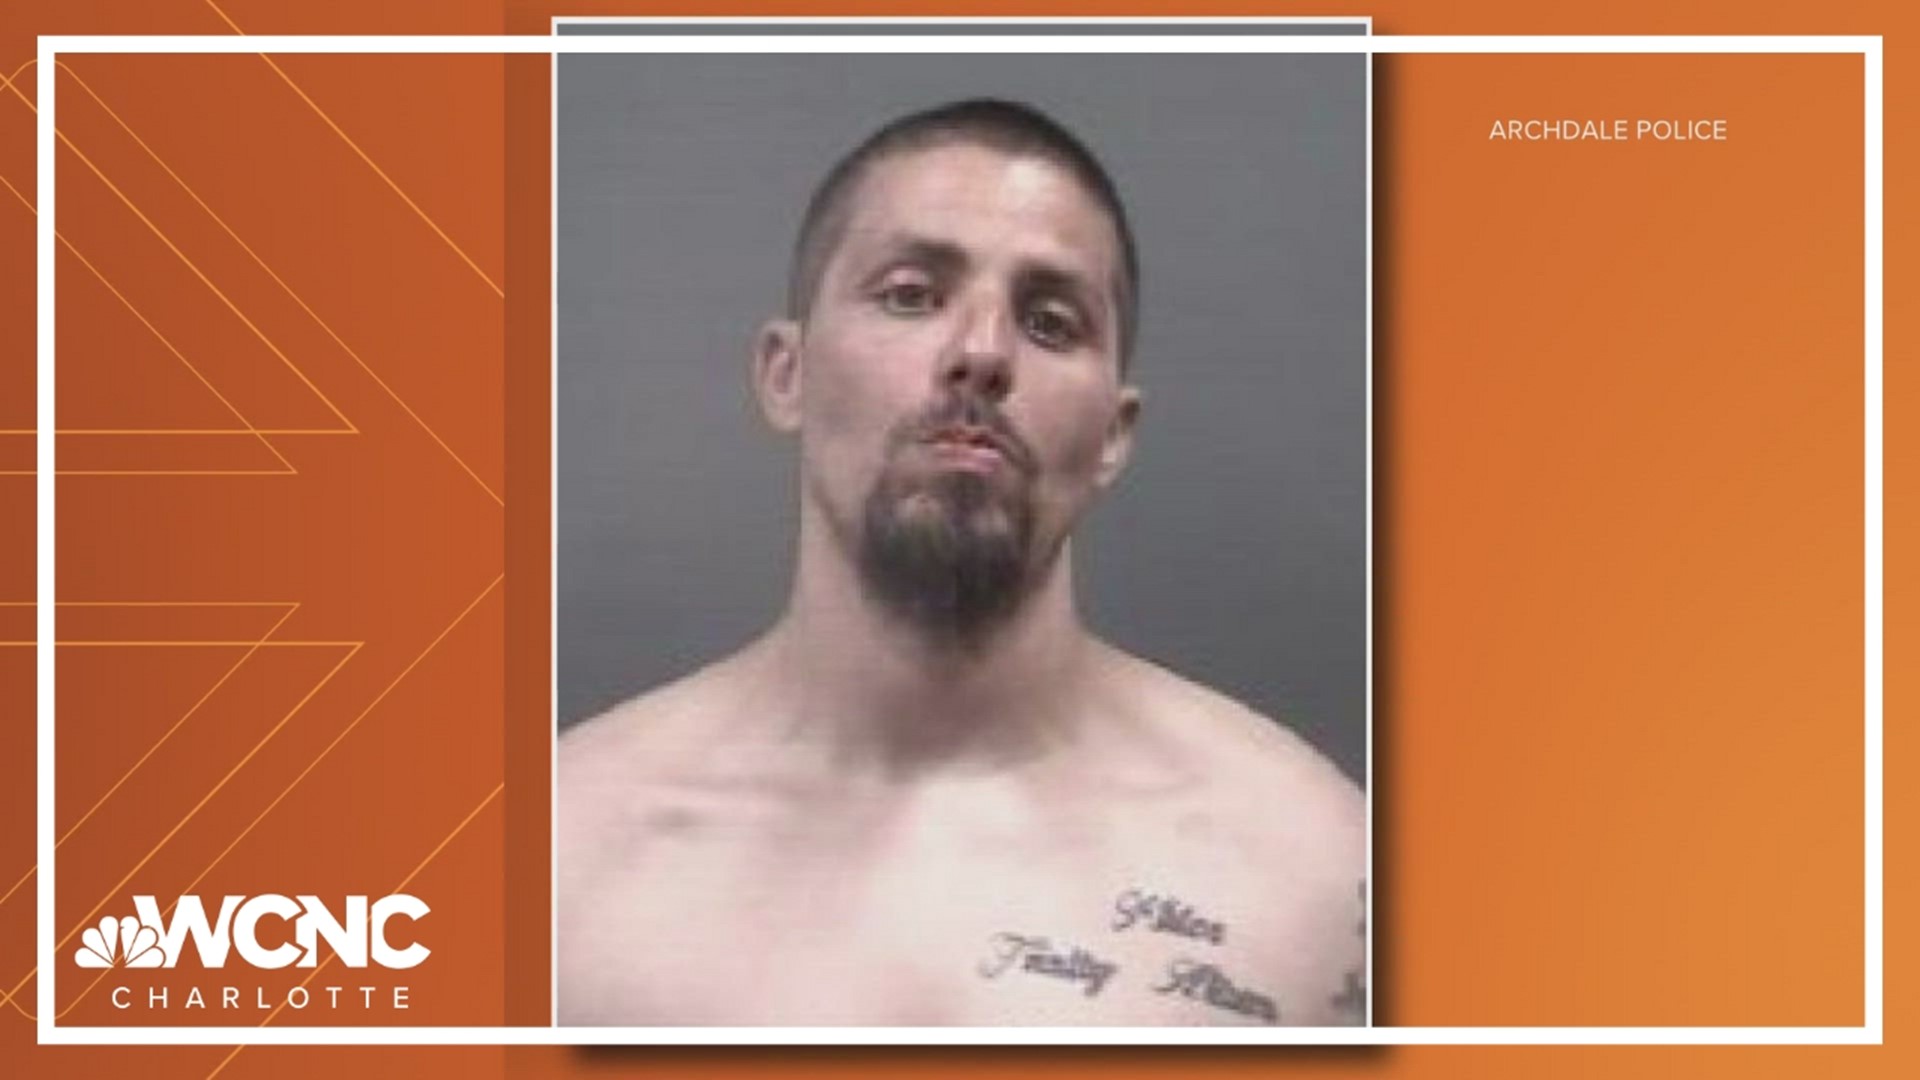 Deputies said they found a stolen 2004 Nissan Titan in Rowan County on Tuesday night, but they still haven't found the suspect, 36-year-old Joshua Blaine Arquette.